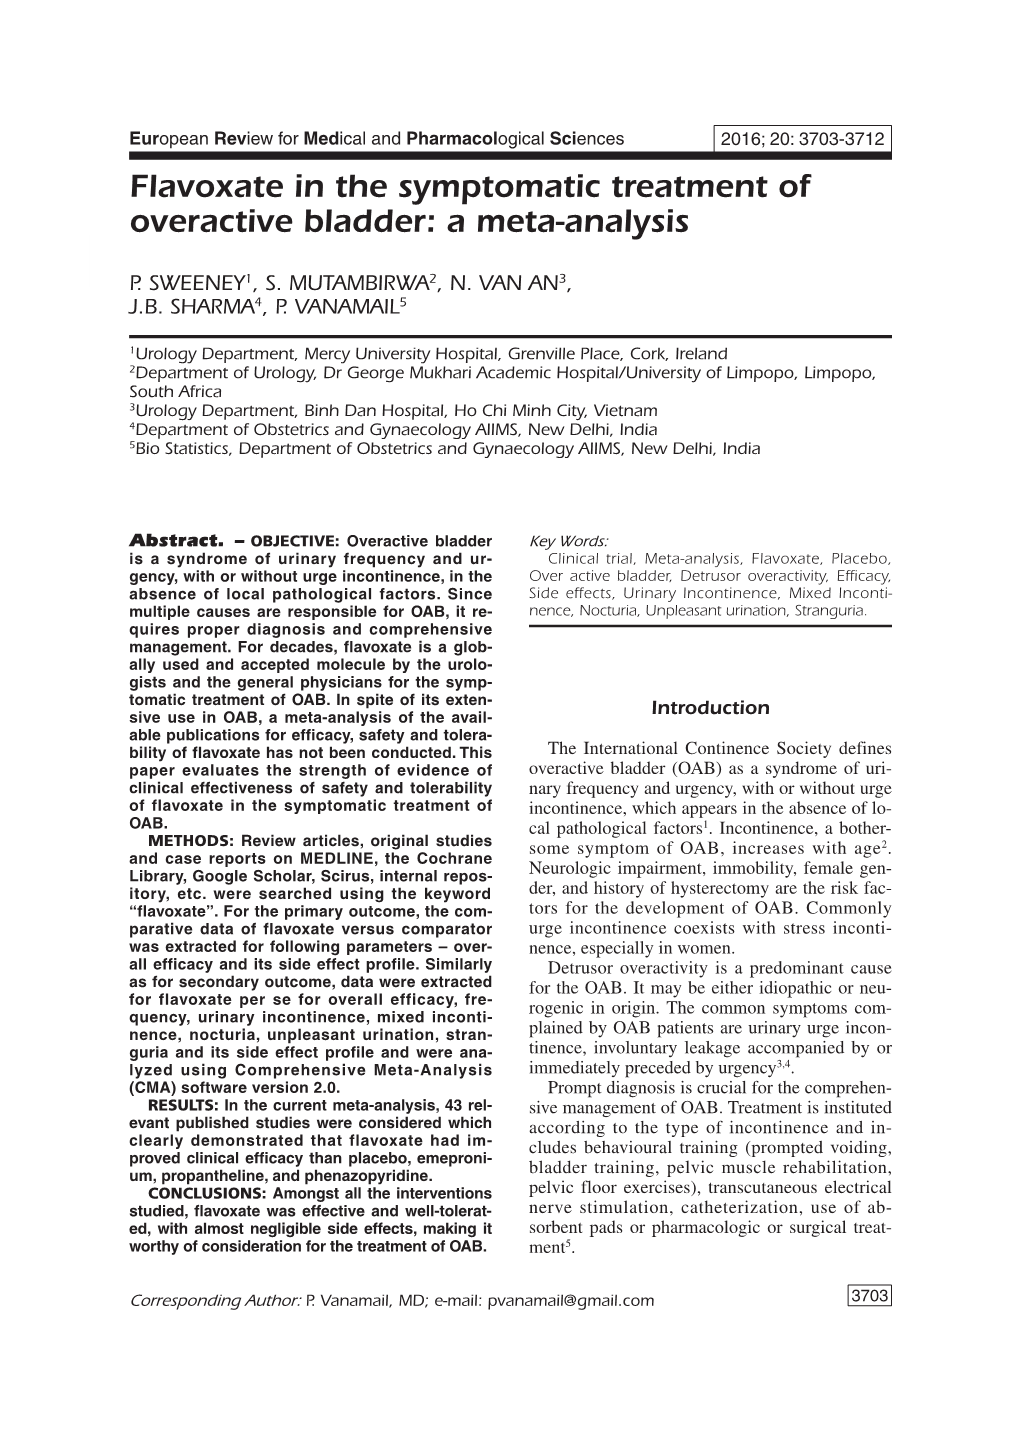 3703-3712-Flavoxate in the Symptomatic Treatment of Overactive Bladder: a Meta-Analysis